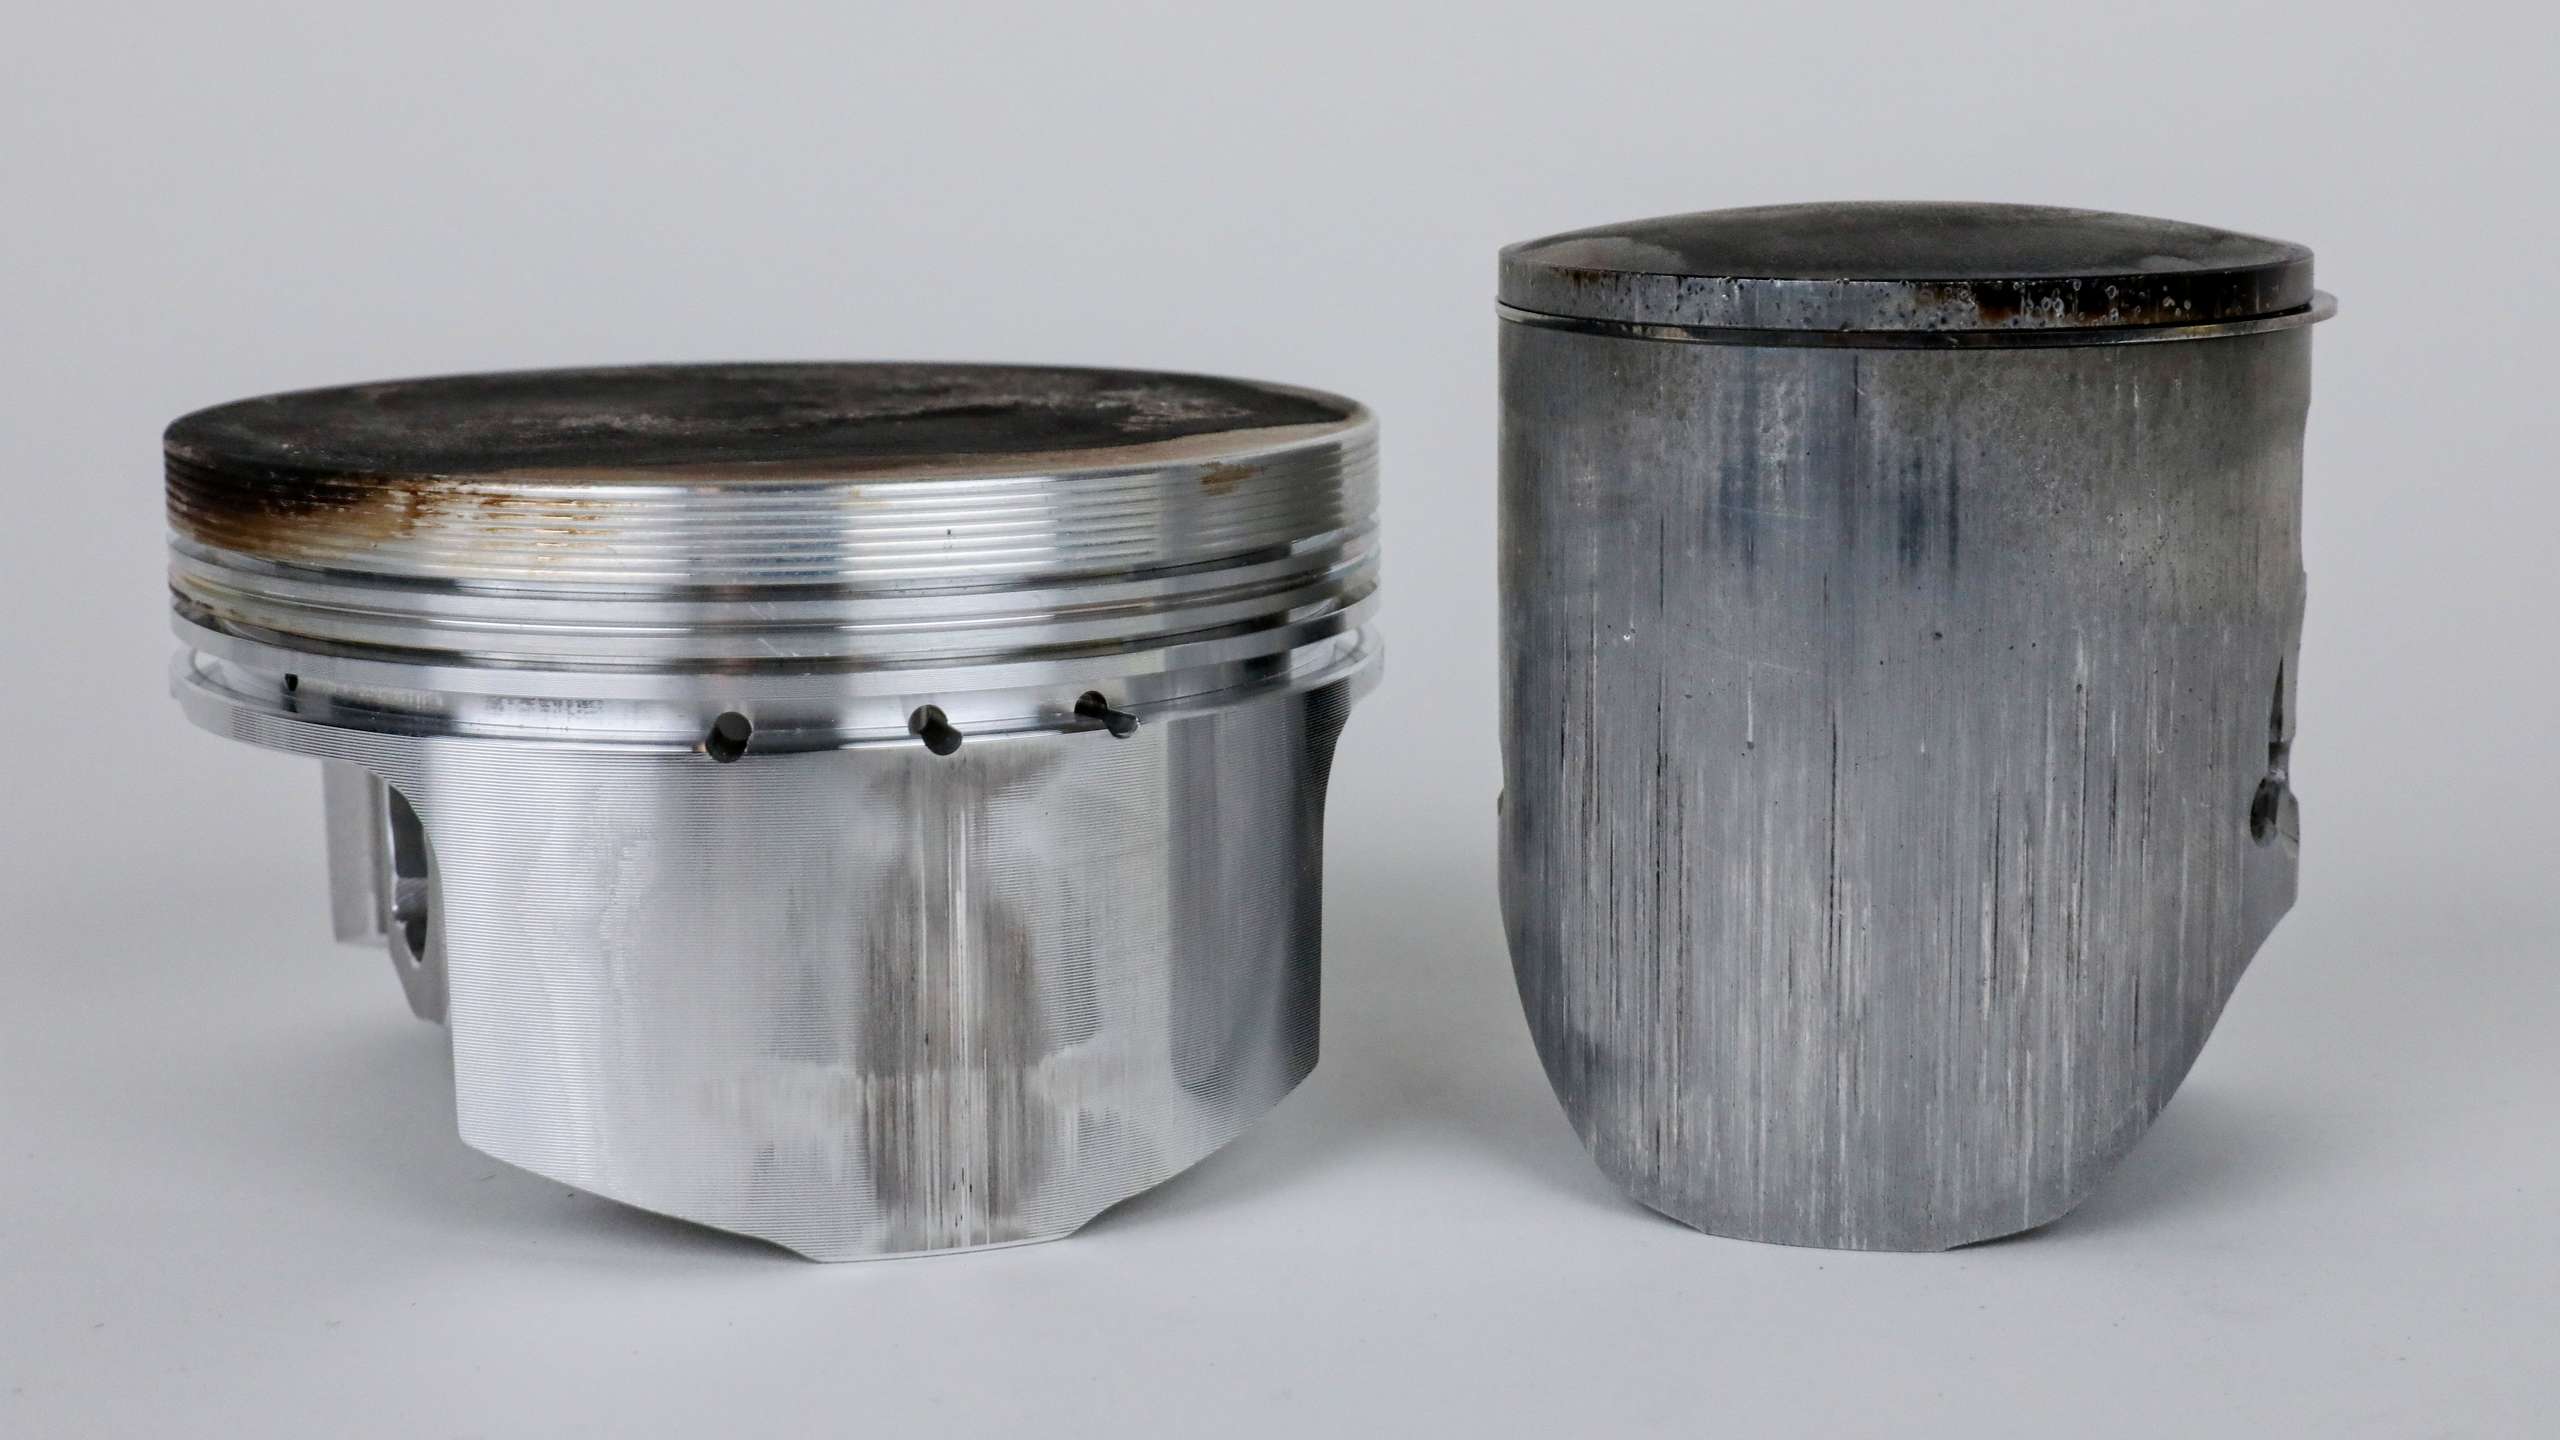 How to Know When to Replace the Piston in Your Motorcycle or ATV